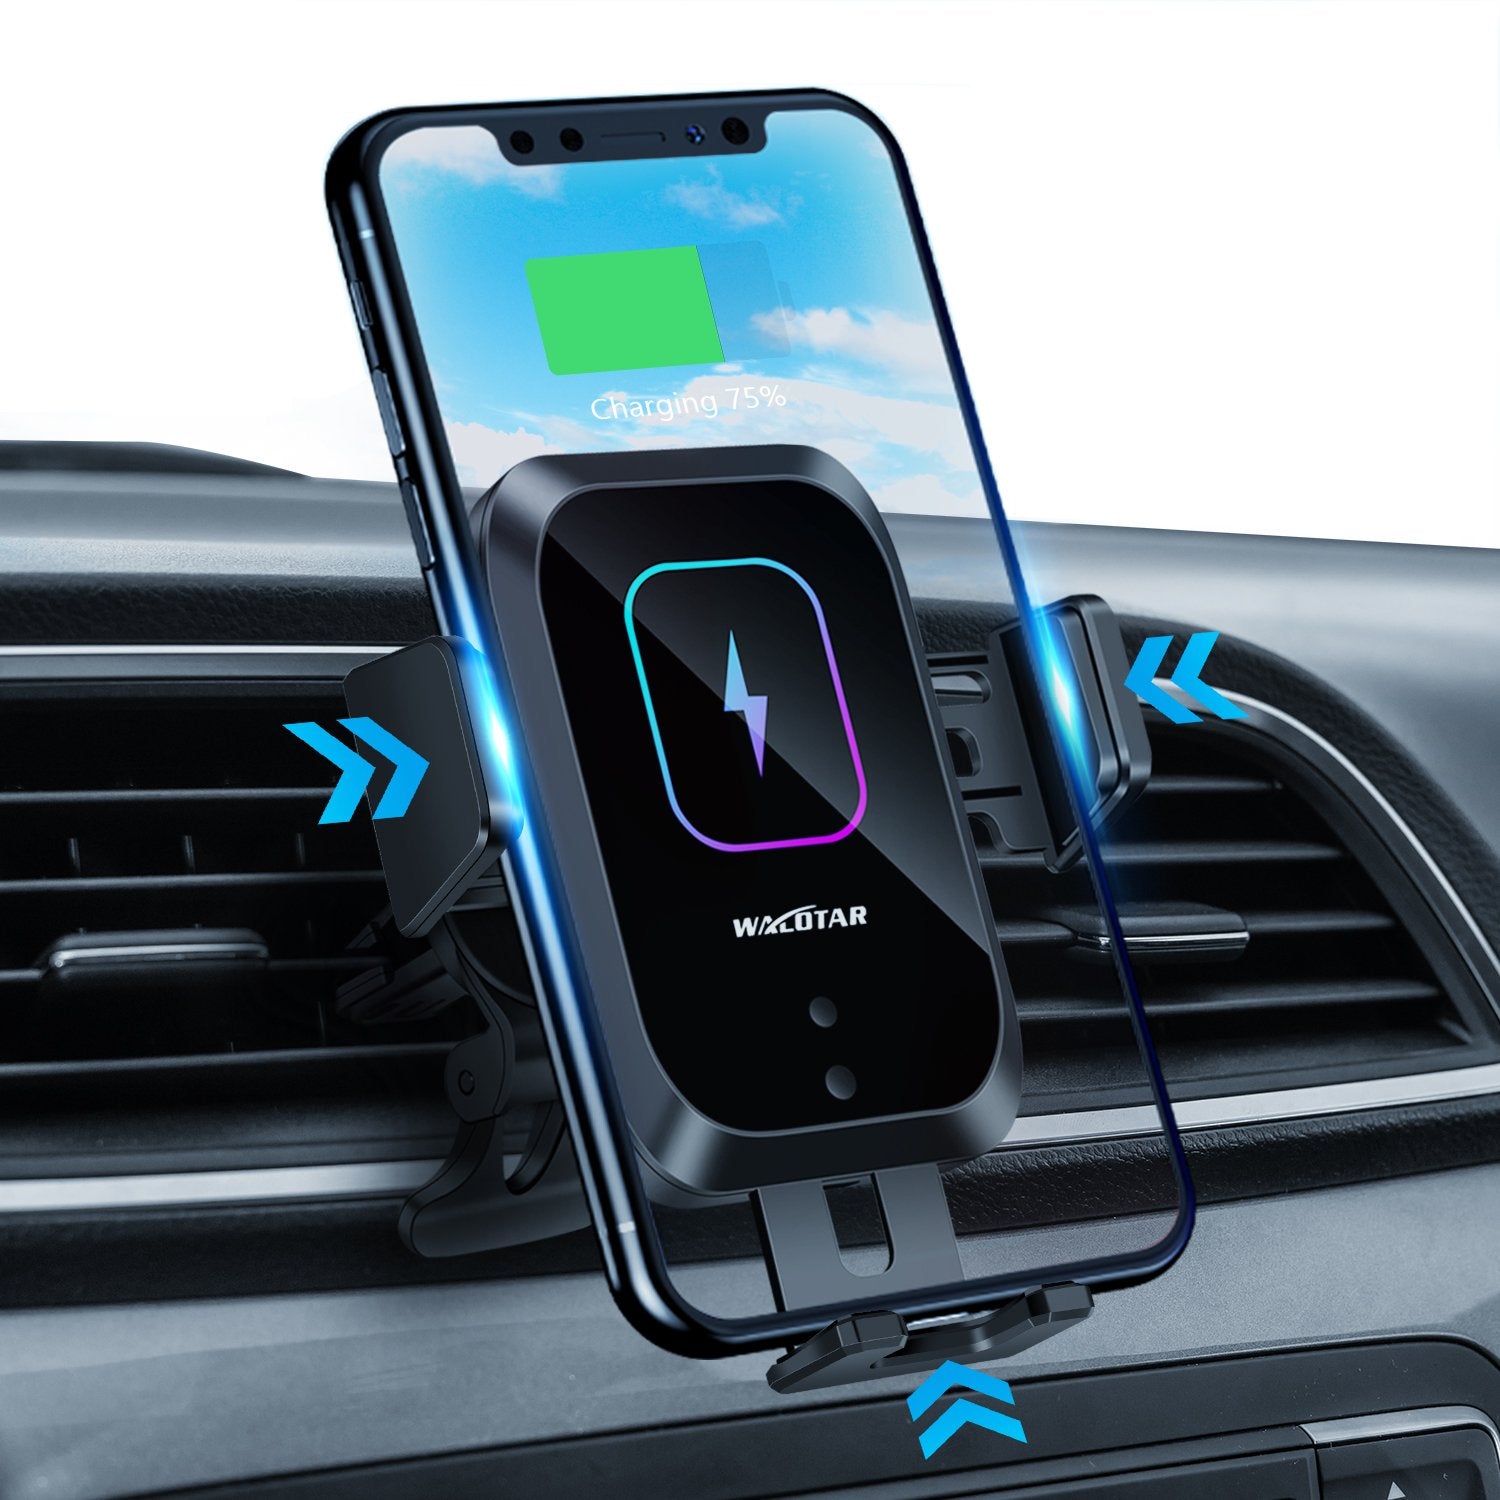 Walotar Wireless Car Charger Auto-Clamping Phone Mount,15W Qi Fast Charging Car Charger Air Vent Phone Holder Compatible with iPhone 12 Pro Max/11 Pro Max/Xs MAX/X/8,Samsung S20/S10/S10+/S9/S9+/S8